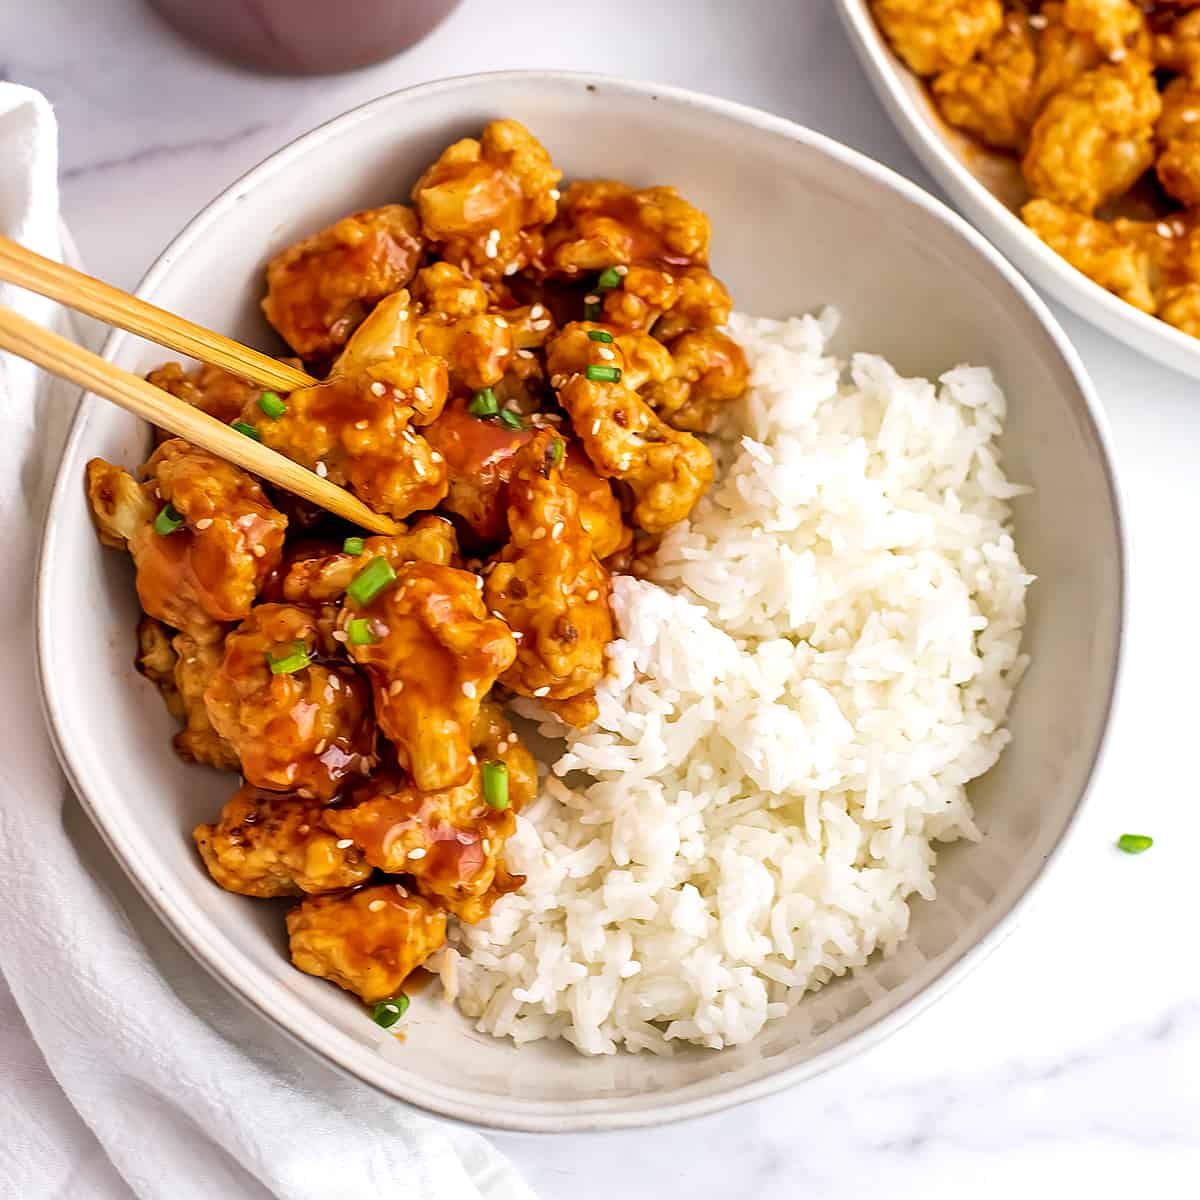 Chopsticks getting a serving of sweet and sour cauliflower from the plate with white rice.